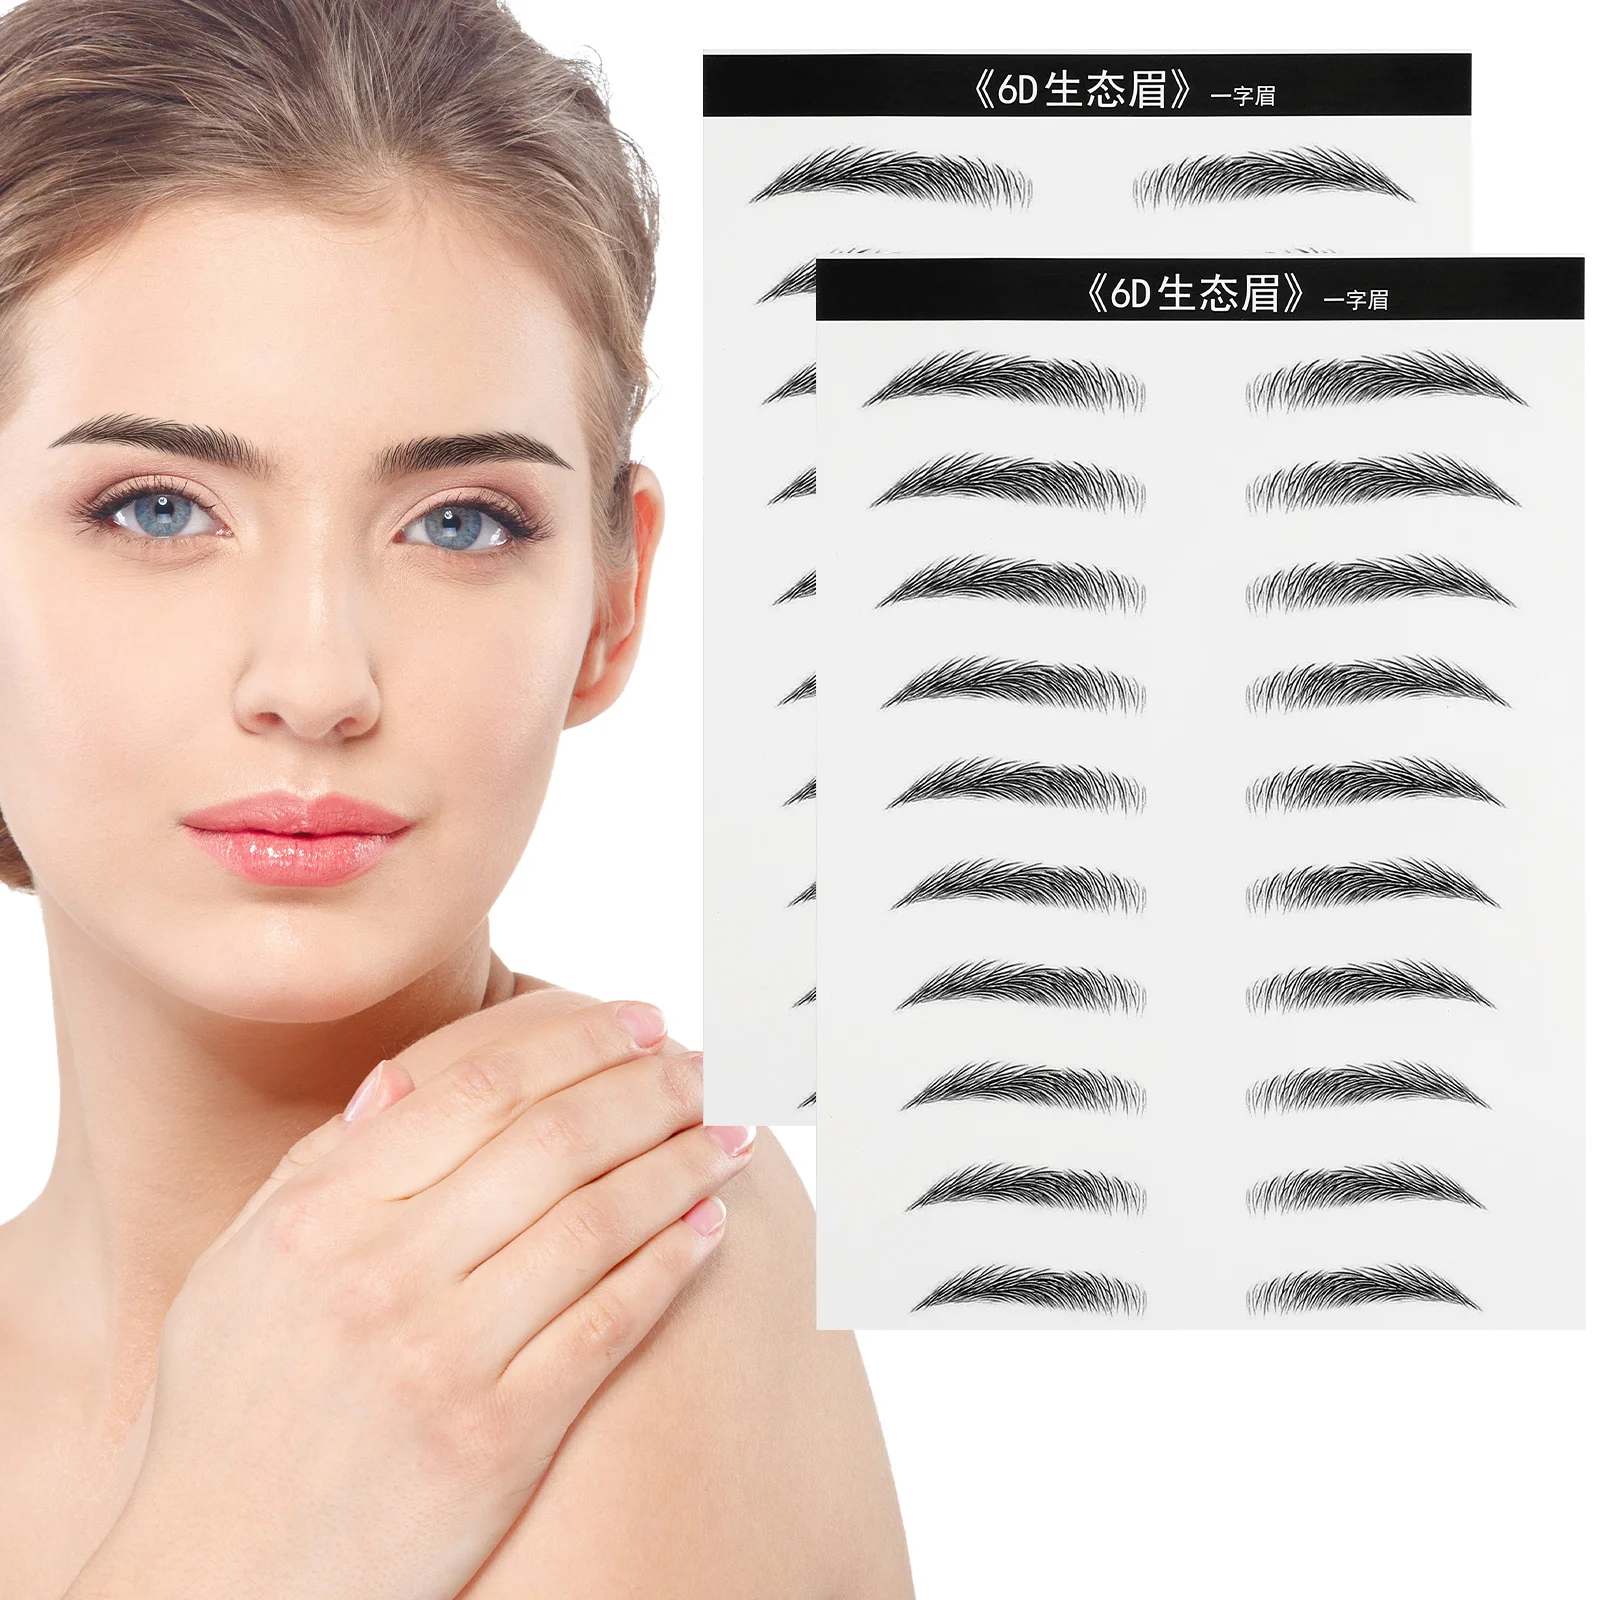 

20 Pairs Fake Eyebrow Tattoo Stickers Disposable Grooming Shaping Eyebrows Transfers